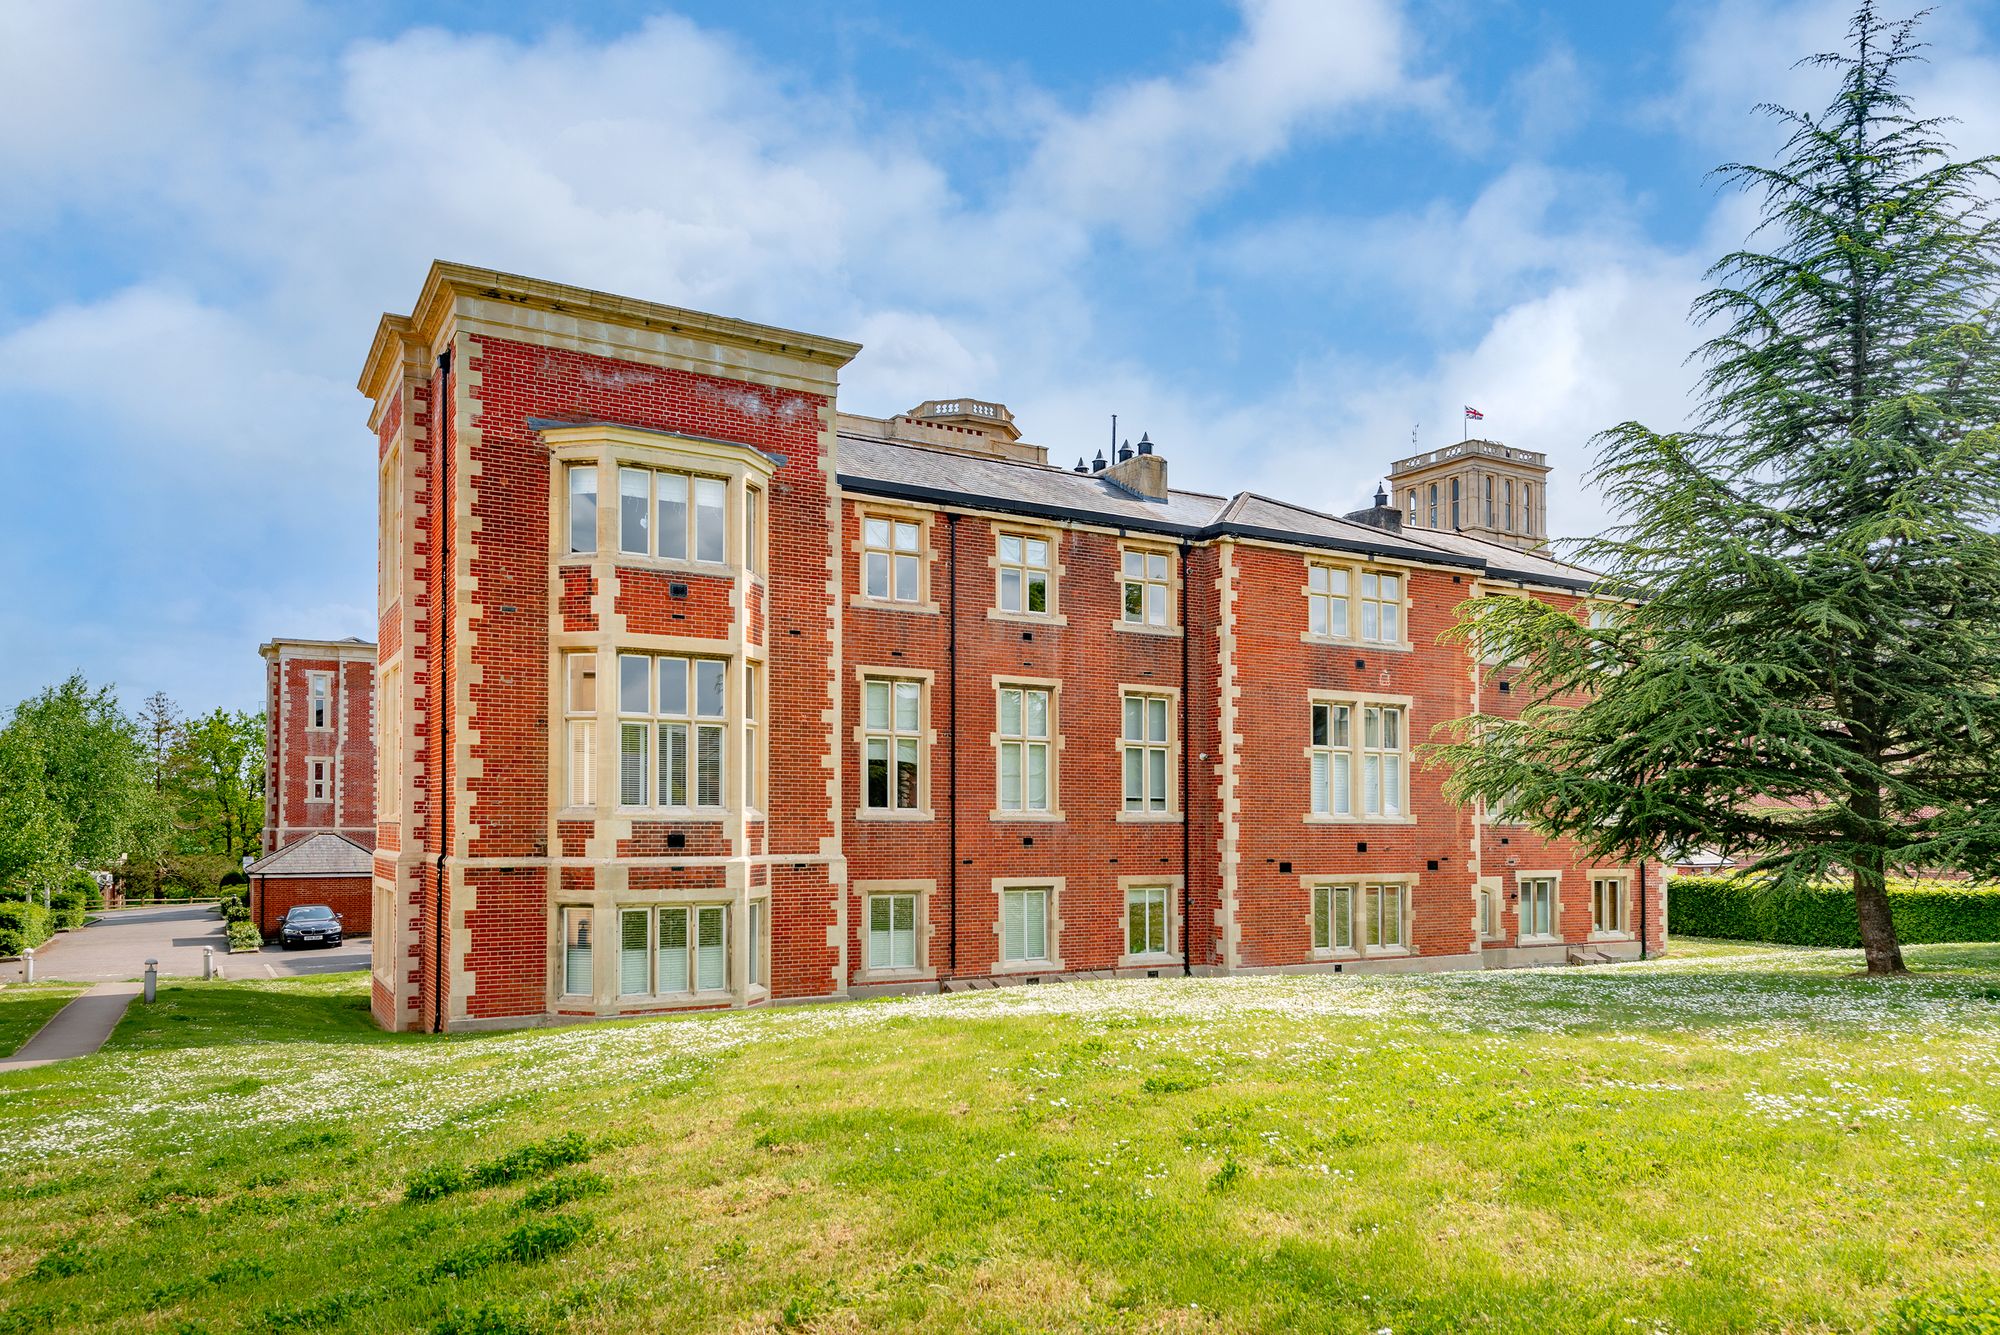 2 bed apartment for sale in Royal Earlswood Park, Redhill - Property Image 1